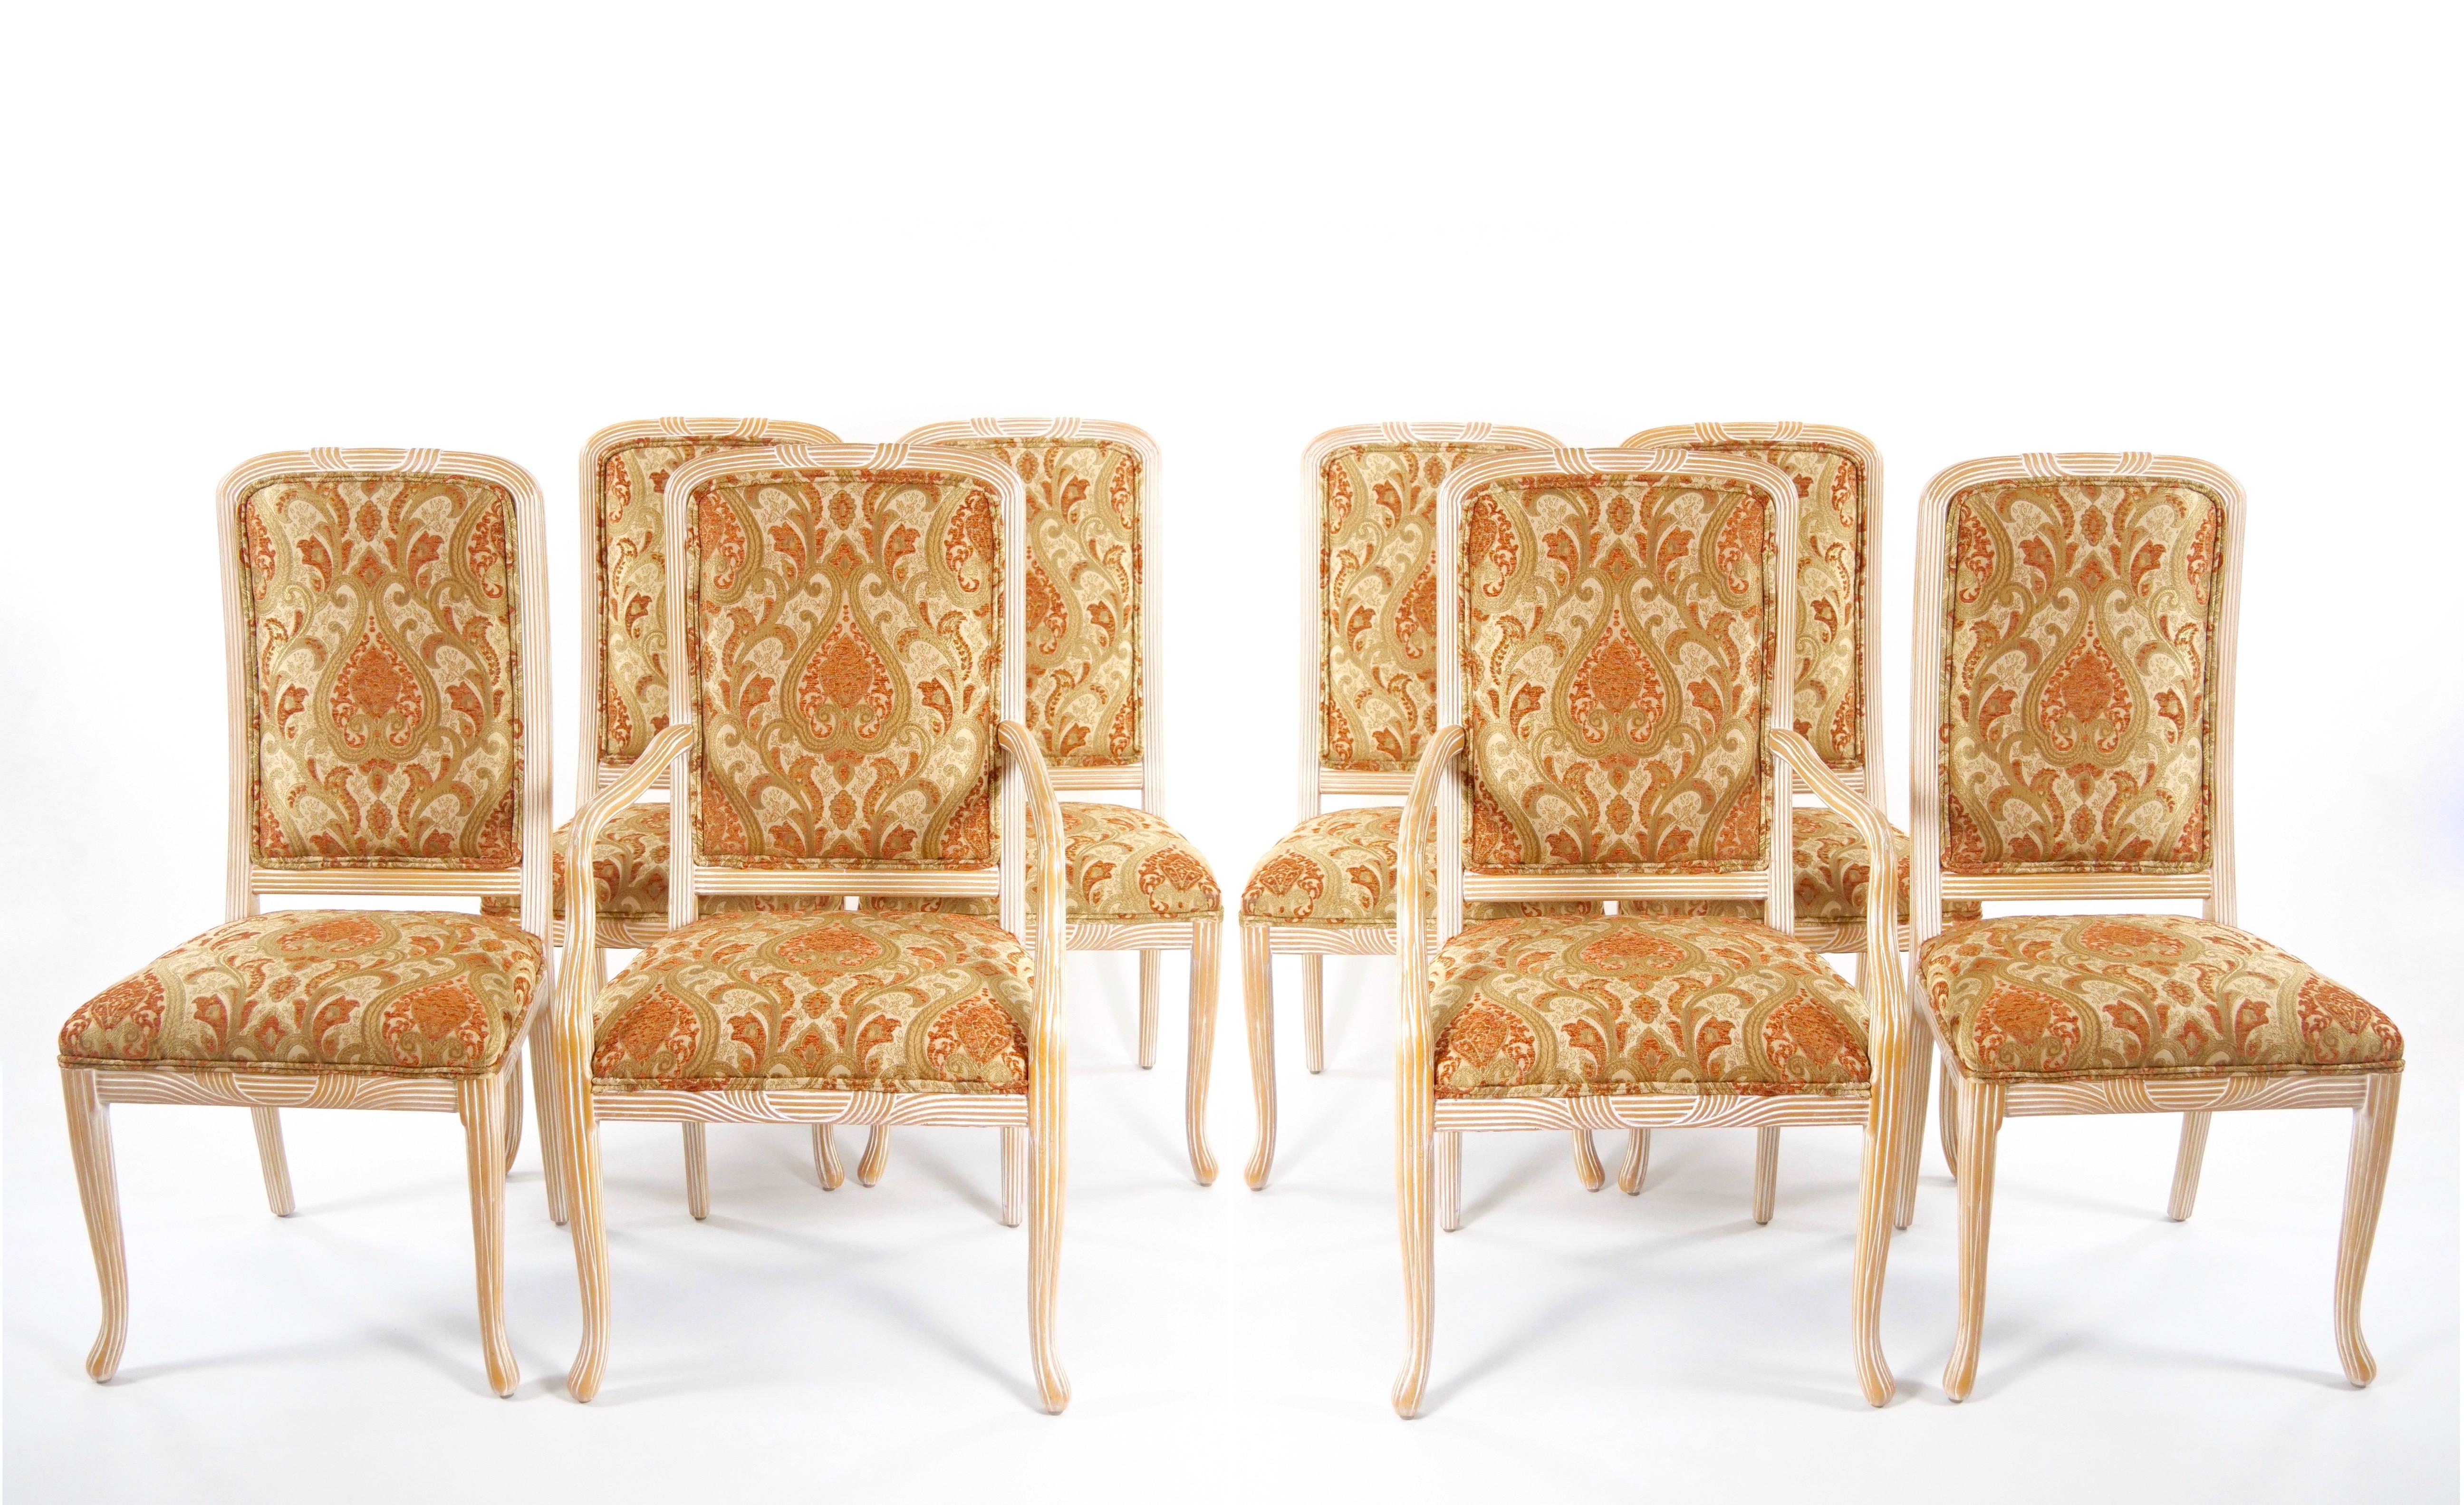 Mid-20th Century Italian Hand Painted / Carved Upholstered Dining Room Chair Set For Sale